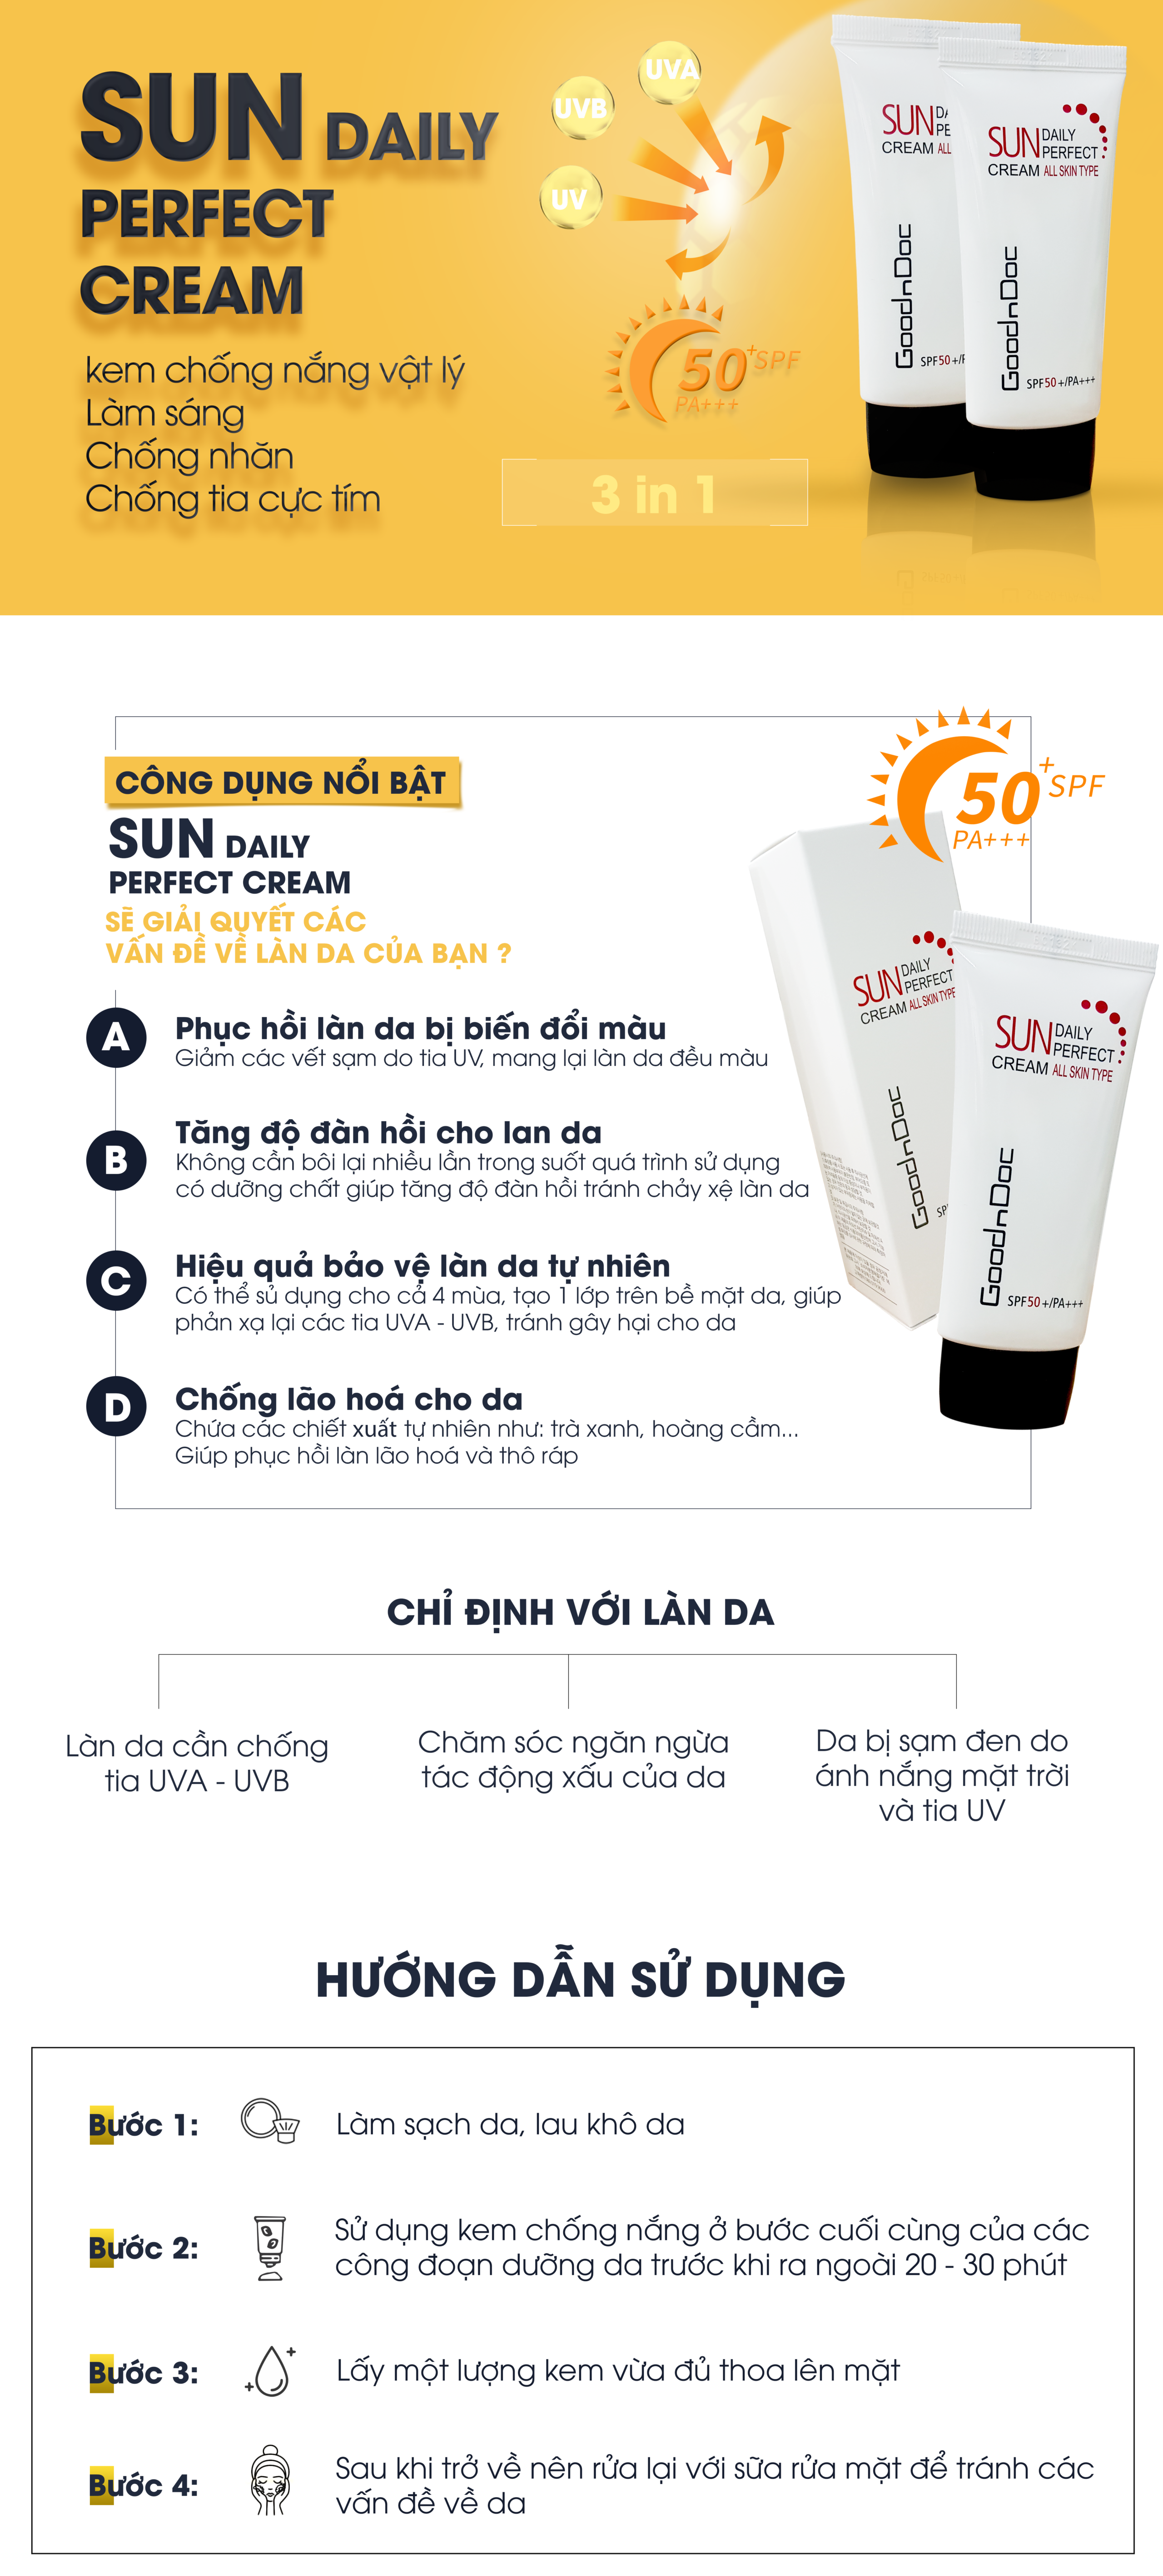 Kem Chống Nắng GoodnDoc Sun Daily Perfect Cream SPF 50+/PA+++